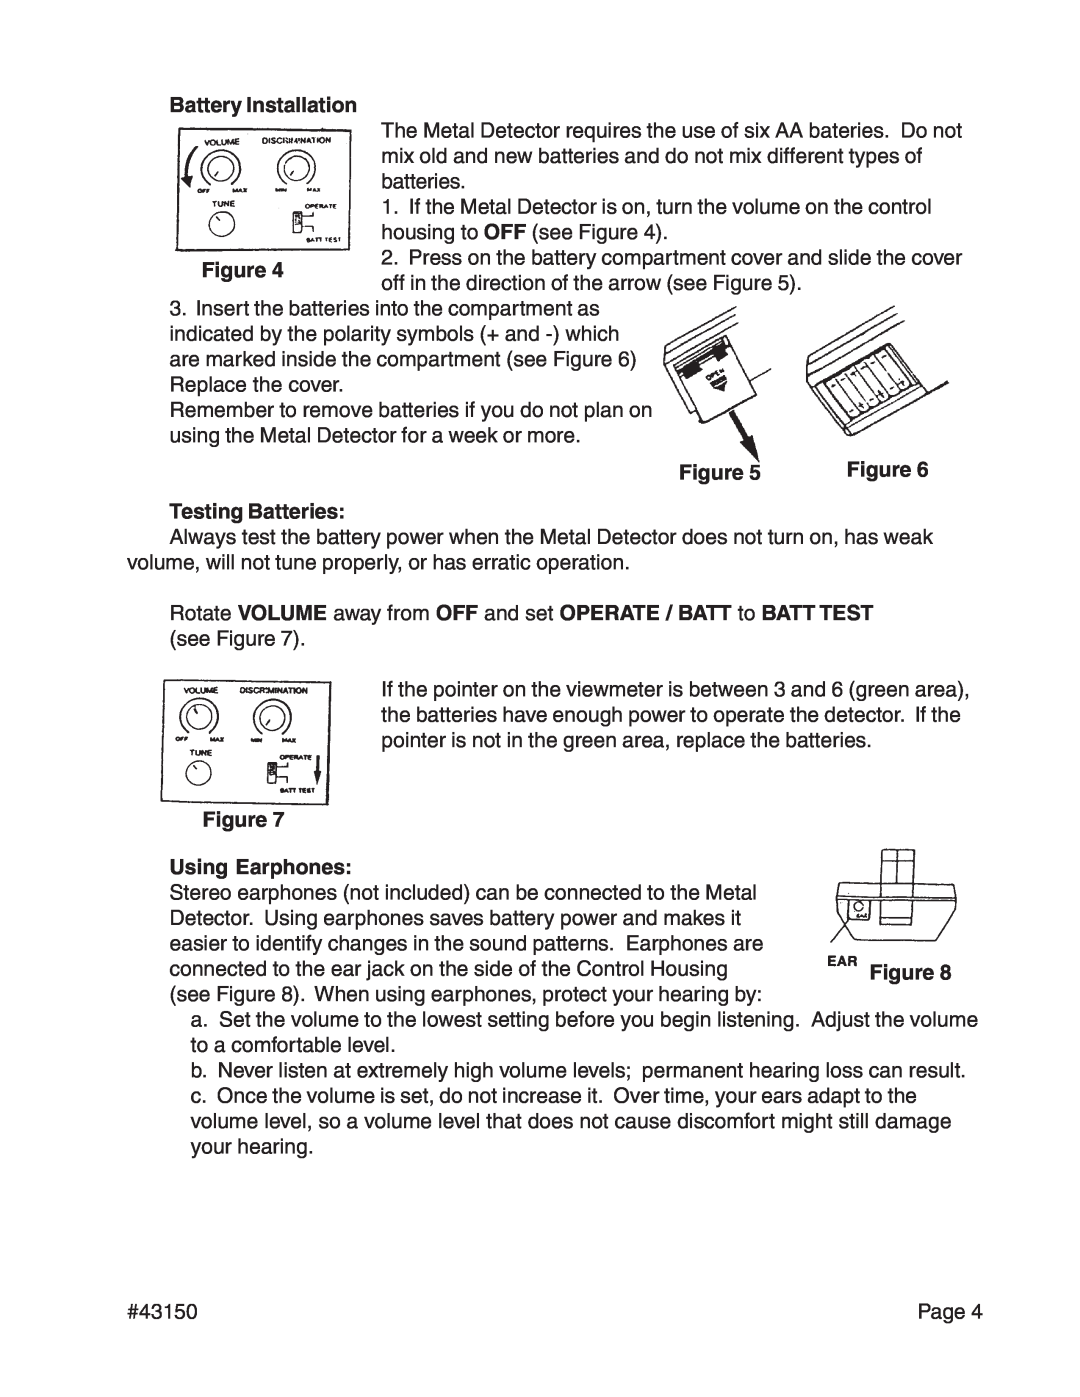 Harbor Freight Tools 43150 operating instructions Testing Batteries, Using Earphones 